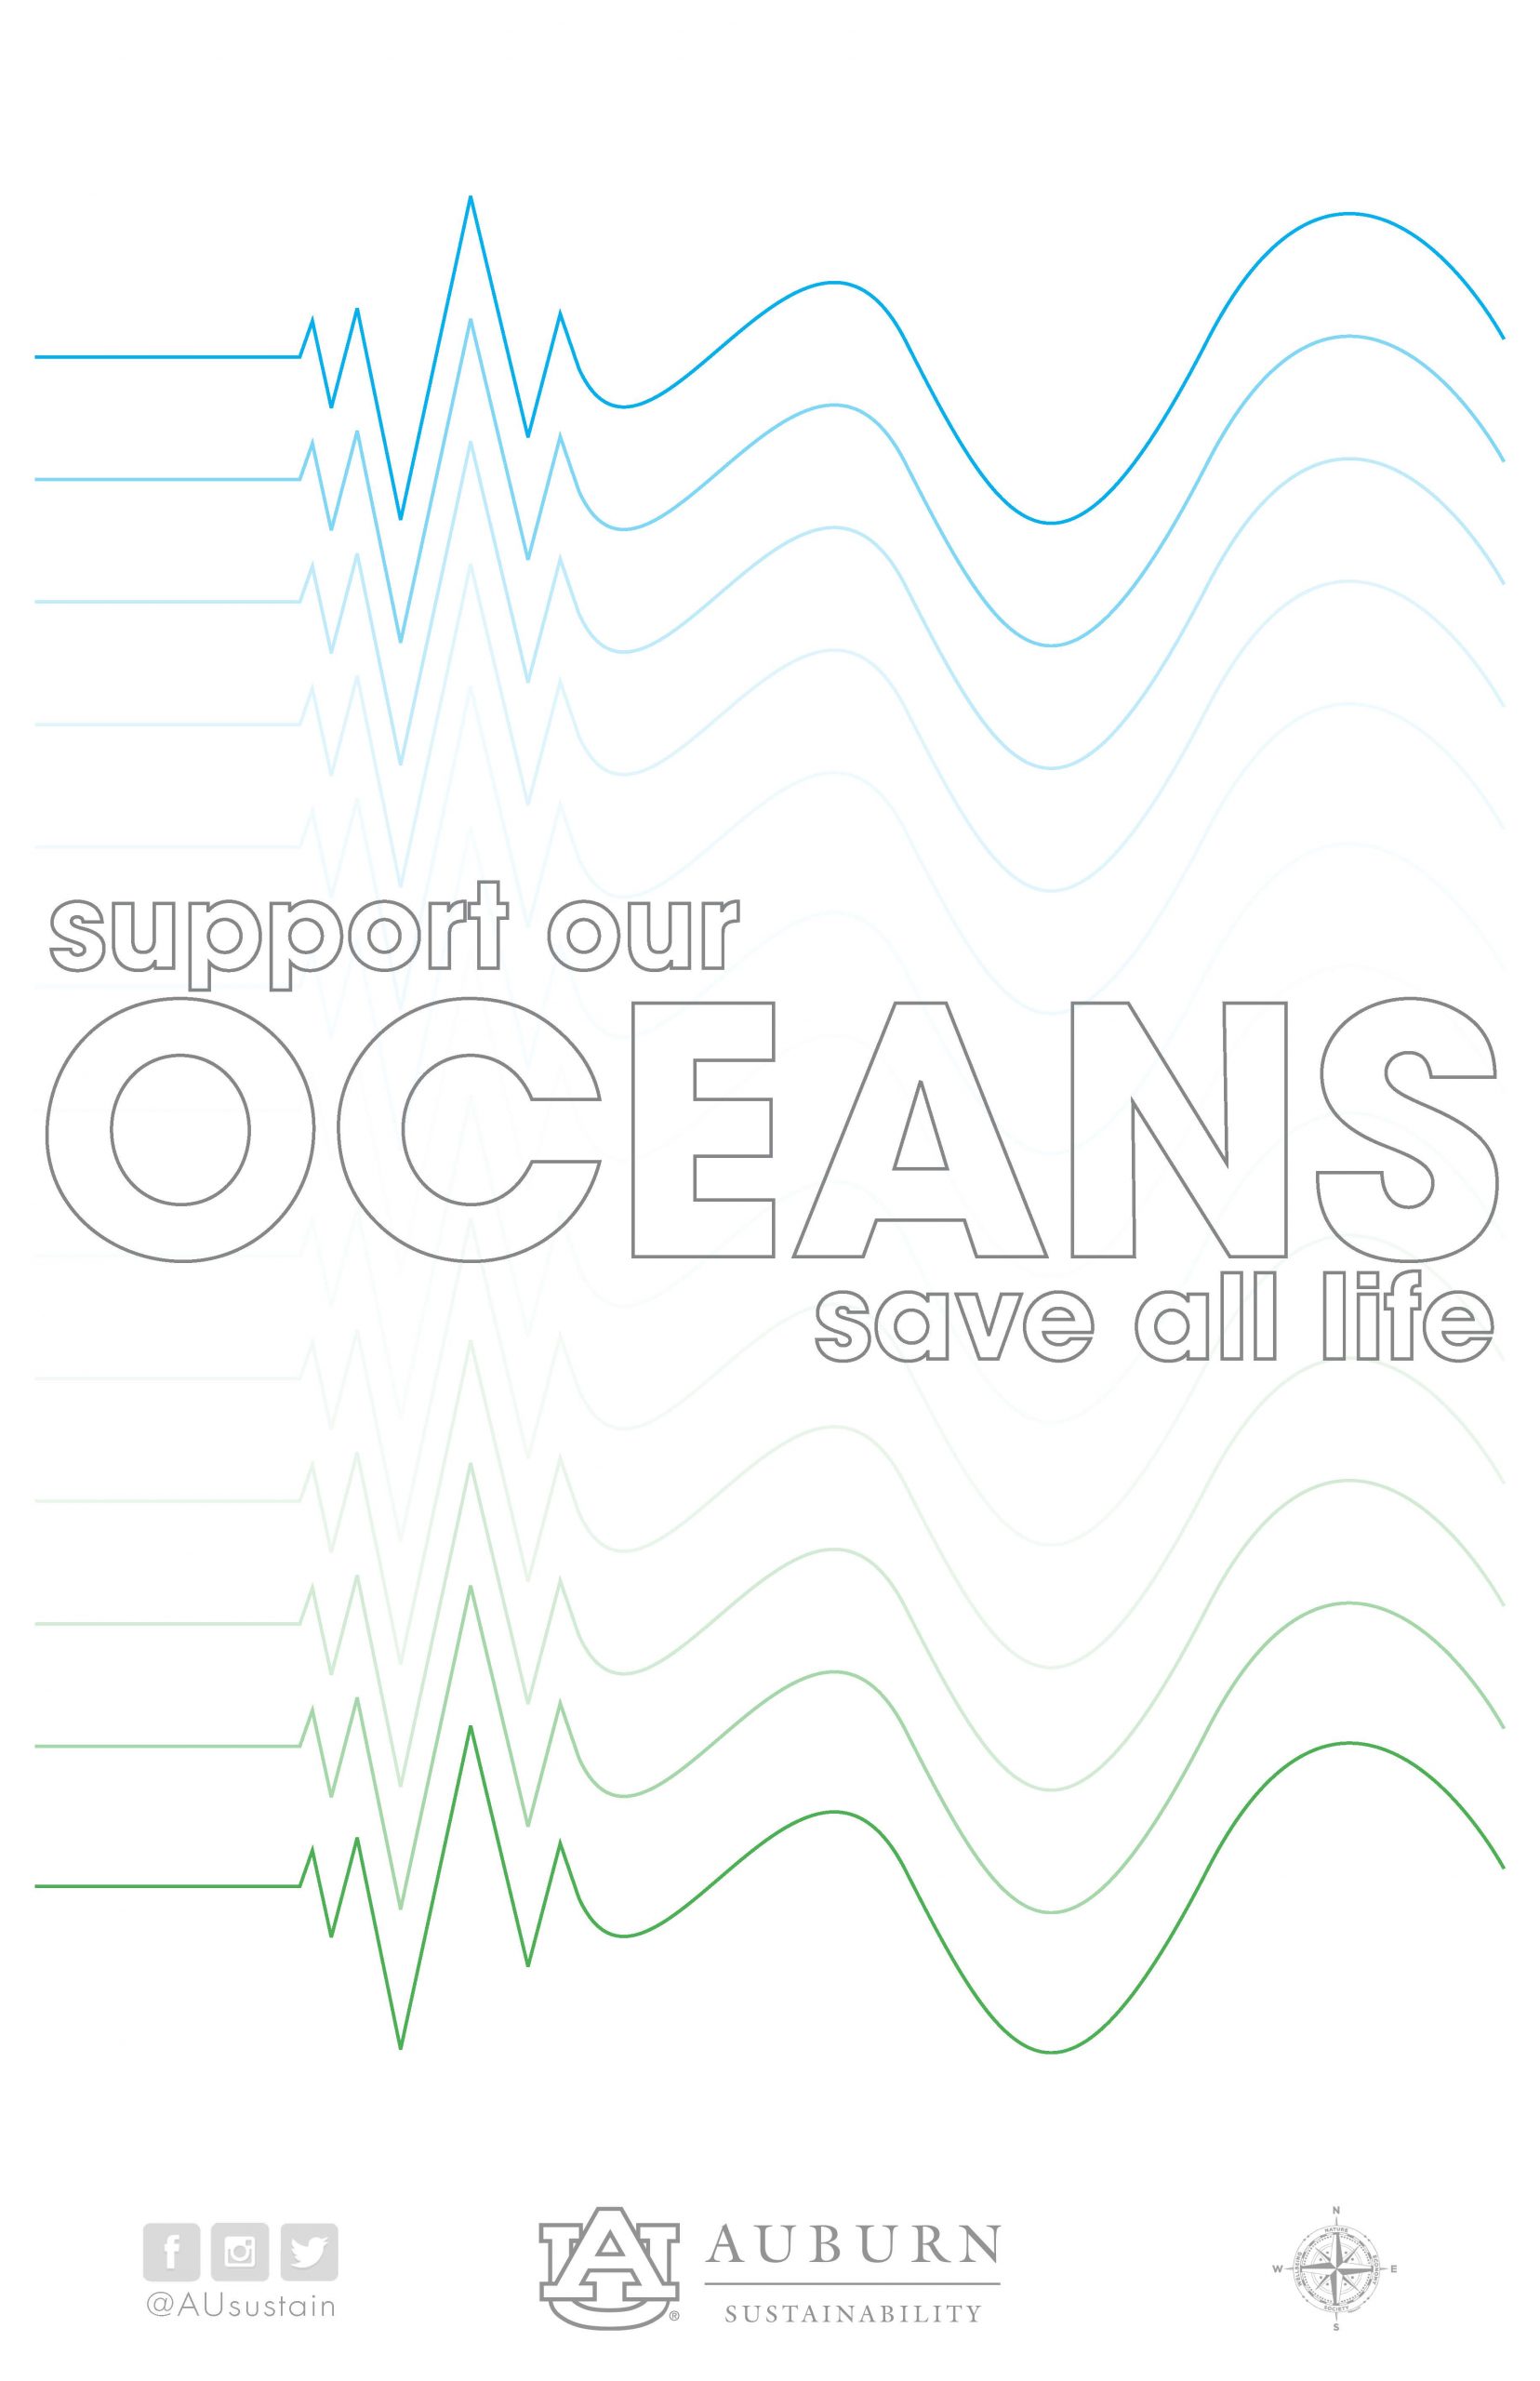 Graphic reading "Support Our Oceans: Save All Life"